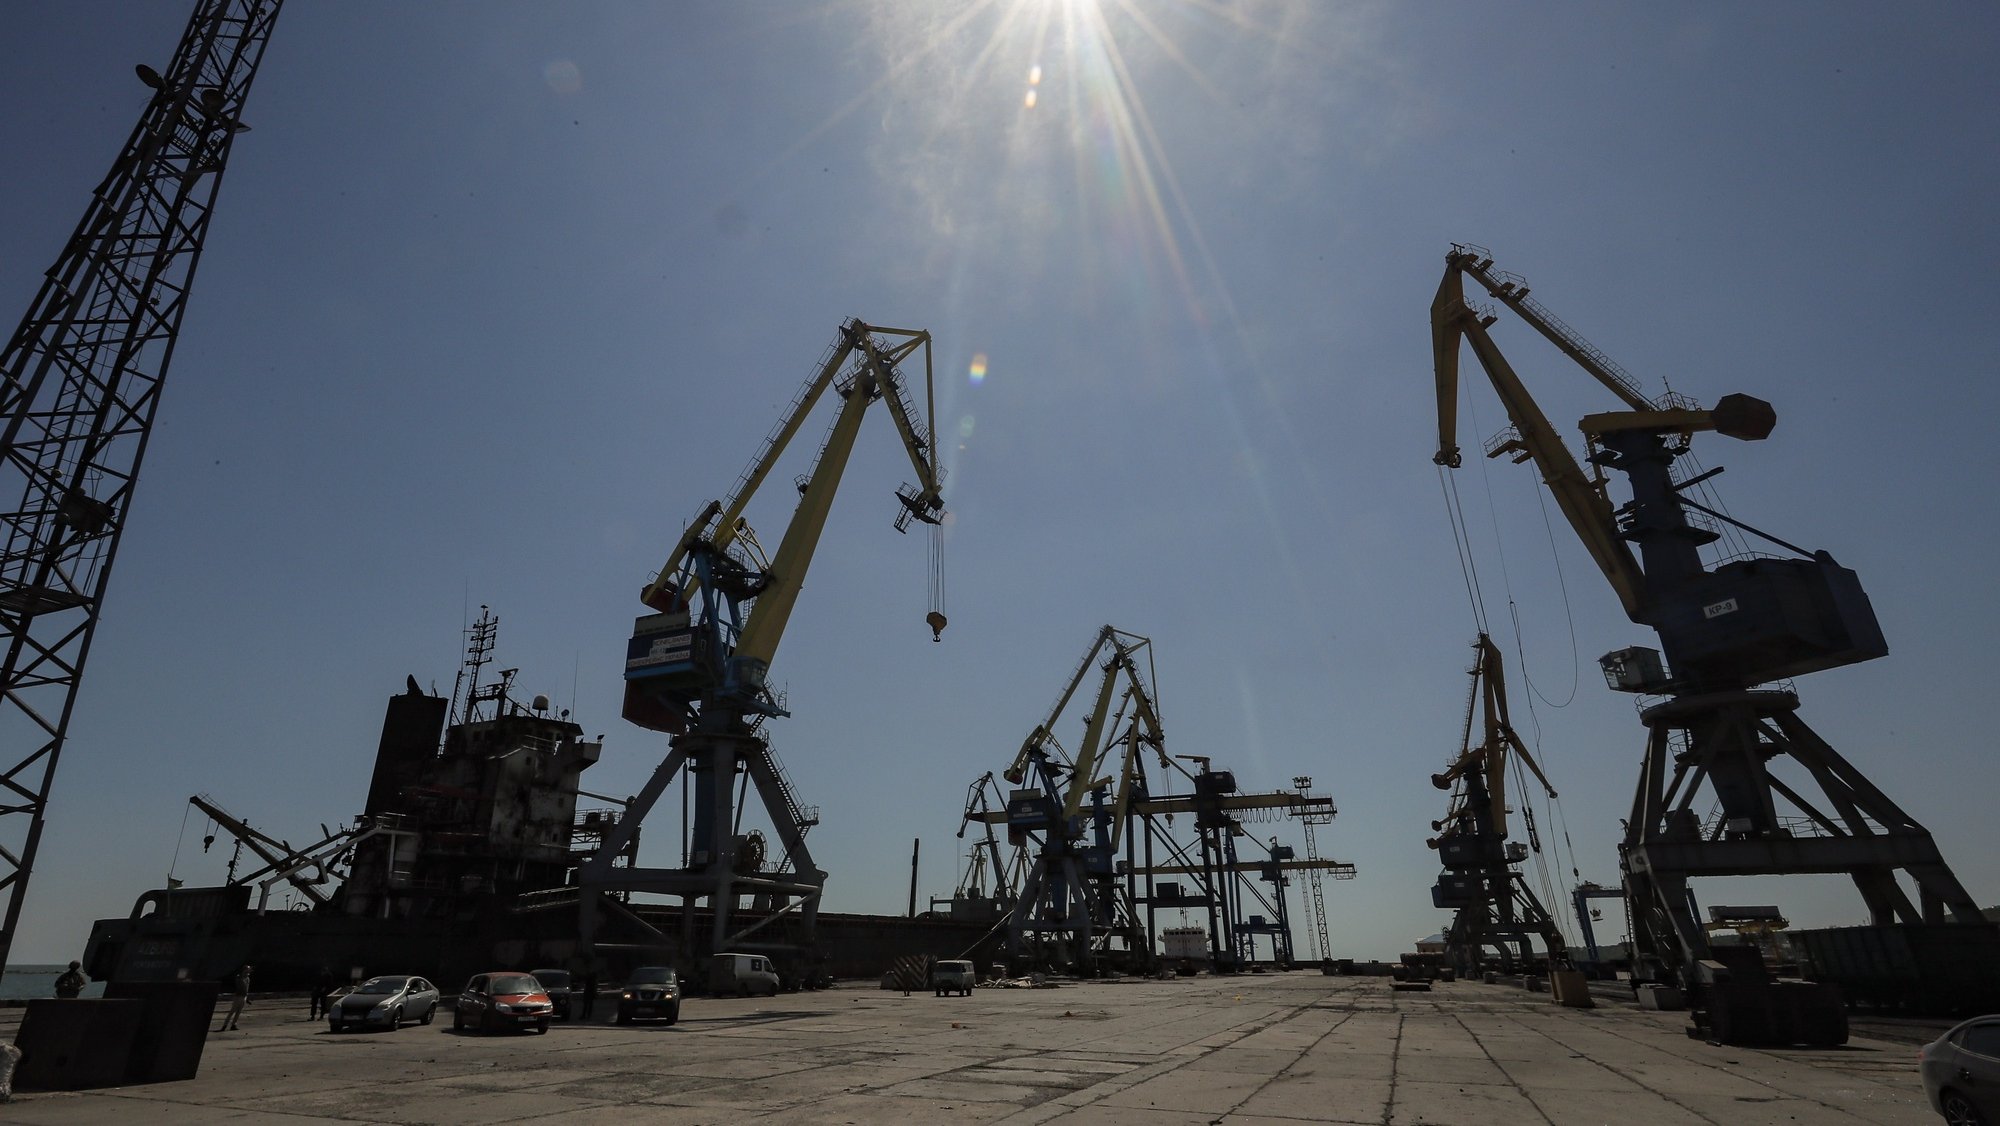 epa09917611 A picture taken during a visit to Mariupol organized by the Russian military shows the cargo sea port in Mariupol, Ukraine, 29 April 2022. Mariupol is located on the northern coast of the Sea of Azov, it is one of the largest commercial seaports in Ukraine. Almost 500 thousand people previously lived in the city. On 16 April, the Russian Defense Ministry announced that the urban area of Mariupol had been cleared of the Ukrainian military, and their remnants were completely blocked on the territory of the Azovstal metallurgical plant. On 24 February Russian troops had entered Ukrainian territory in what the Russian president declared a &#039;special military operation&#039;, resulting in fighting and destruction in the country, a huge flow of refugees, and multiple sanctions against Russia.  EPA/SERGEI ILNITSKY